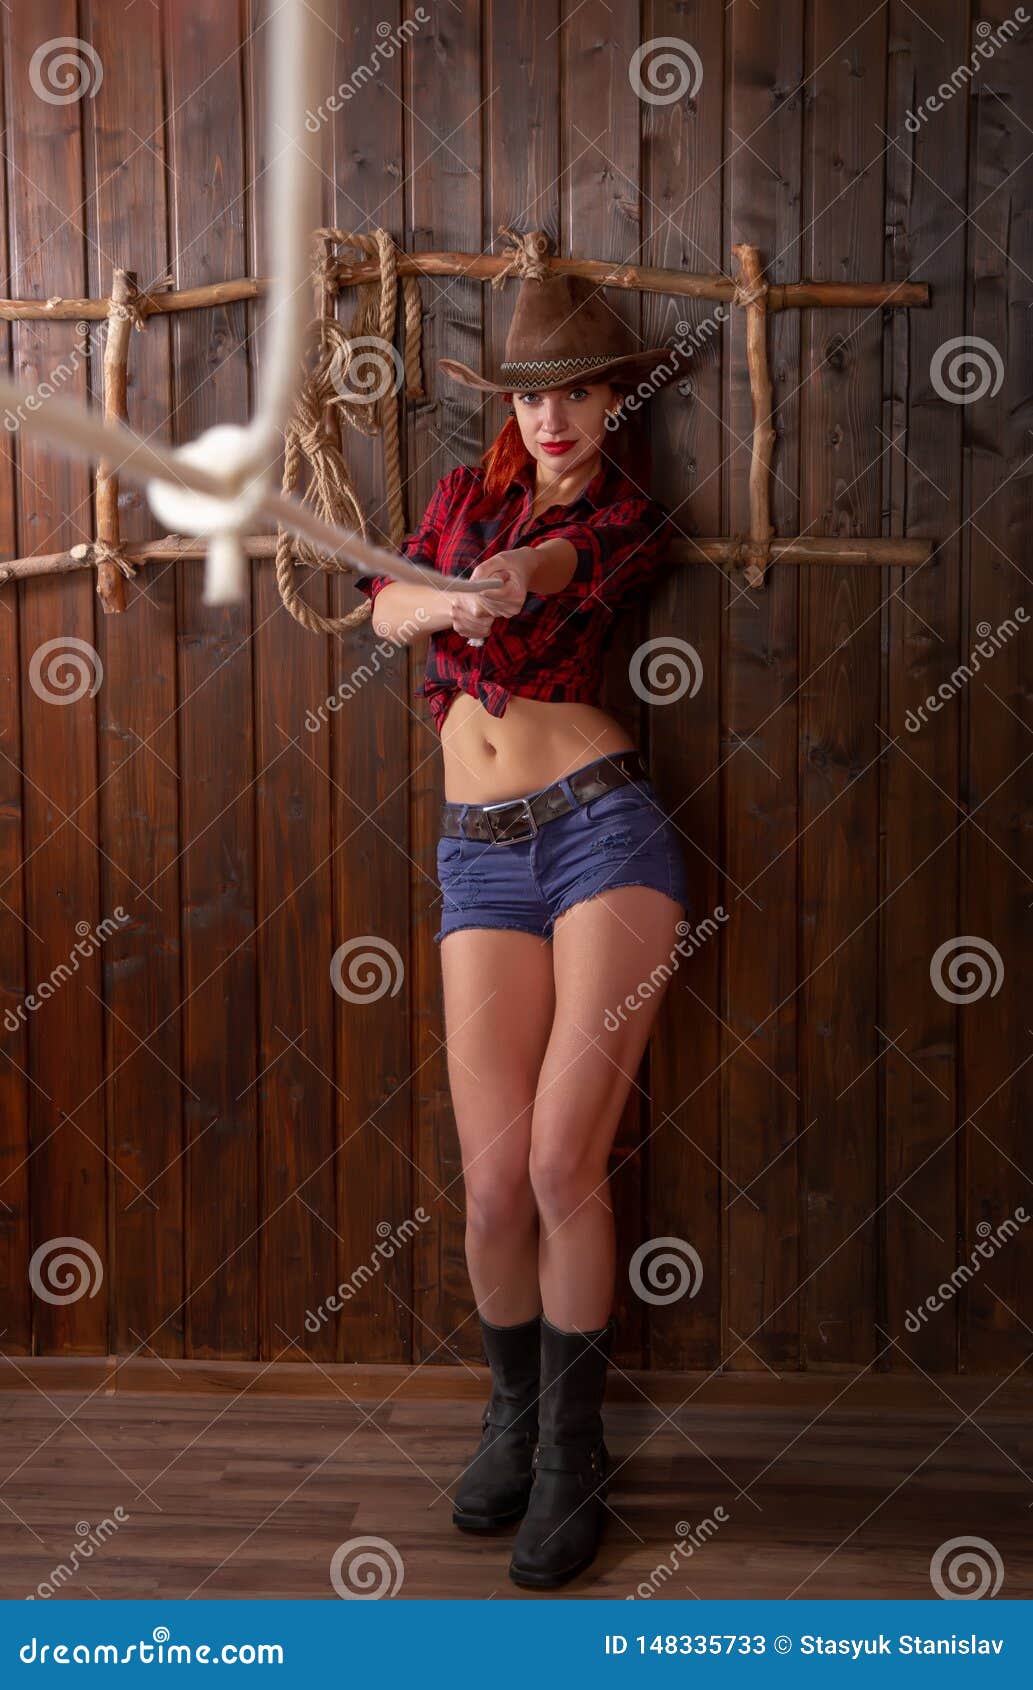 outfit cowboy girl